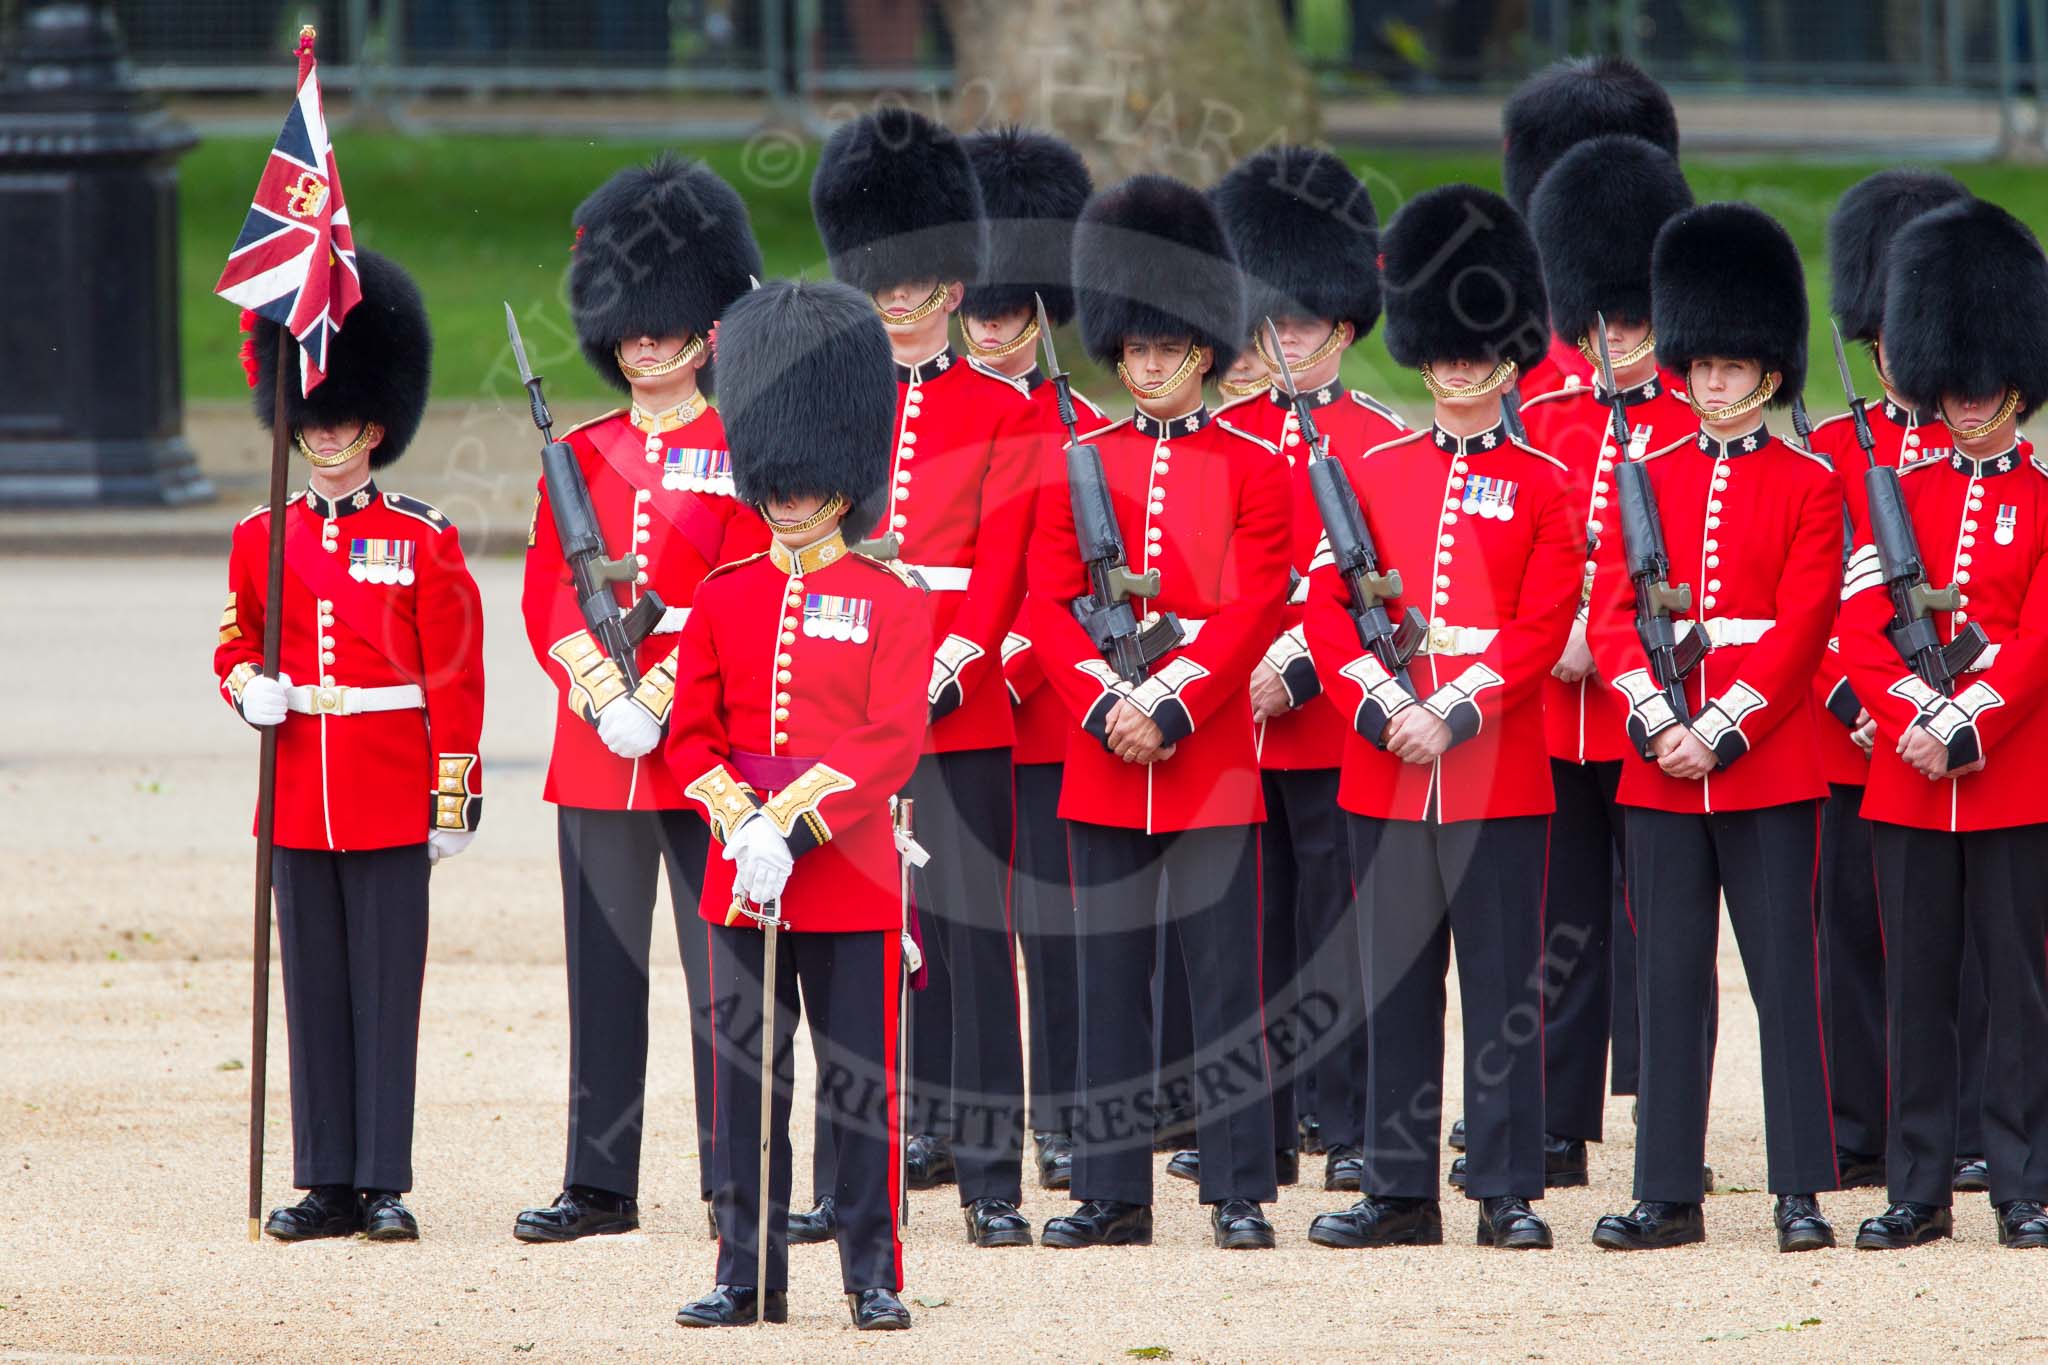 The Colonel's Review 2012: No. 1 Guard (Escort for the Colour), 1st Battalion Coldstream Guards..
Horse Guards Parade, Westminster,
London SW1,

United Kingdom,
on 09 June 2012 at 10:46, image #117